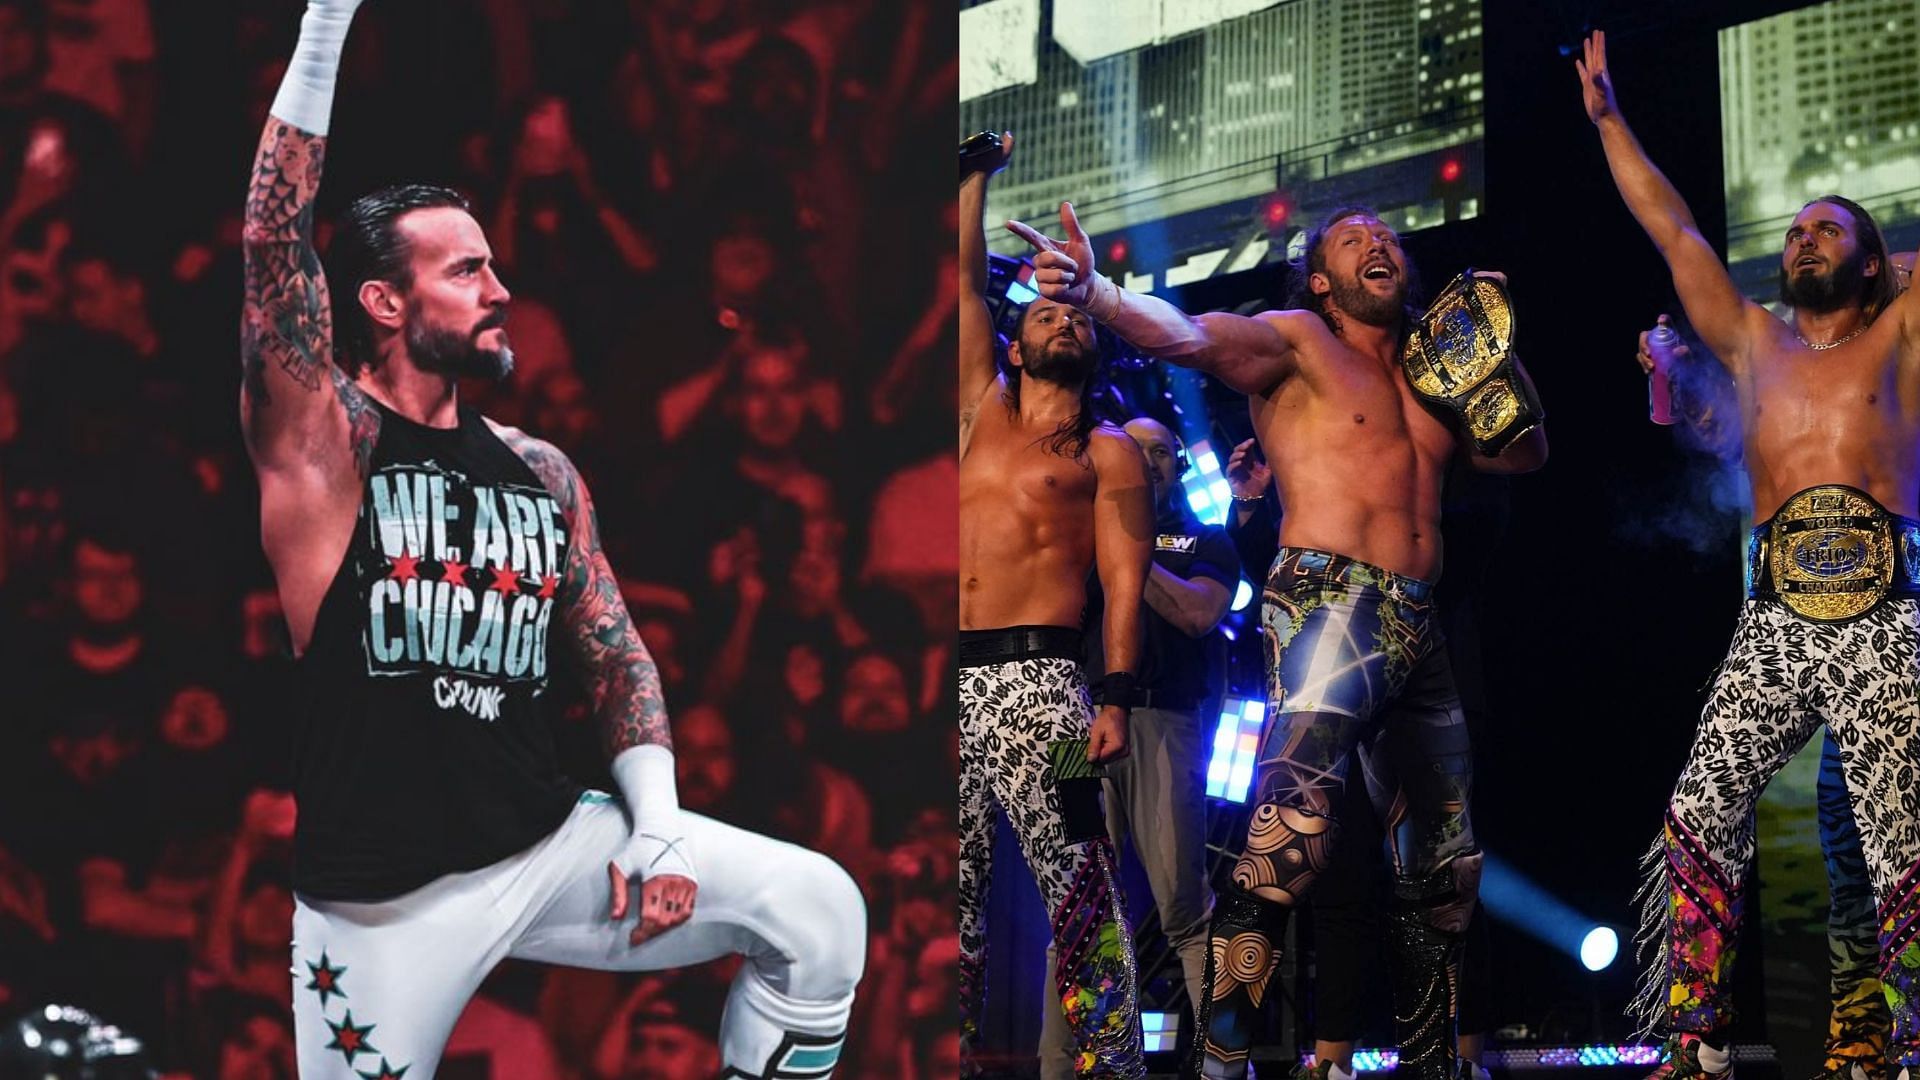 Has the mood in AEW changed now that the dust has settled around CM Punk and The Elite?